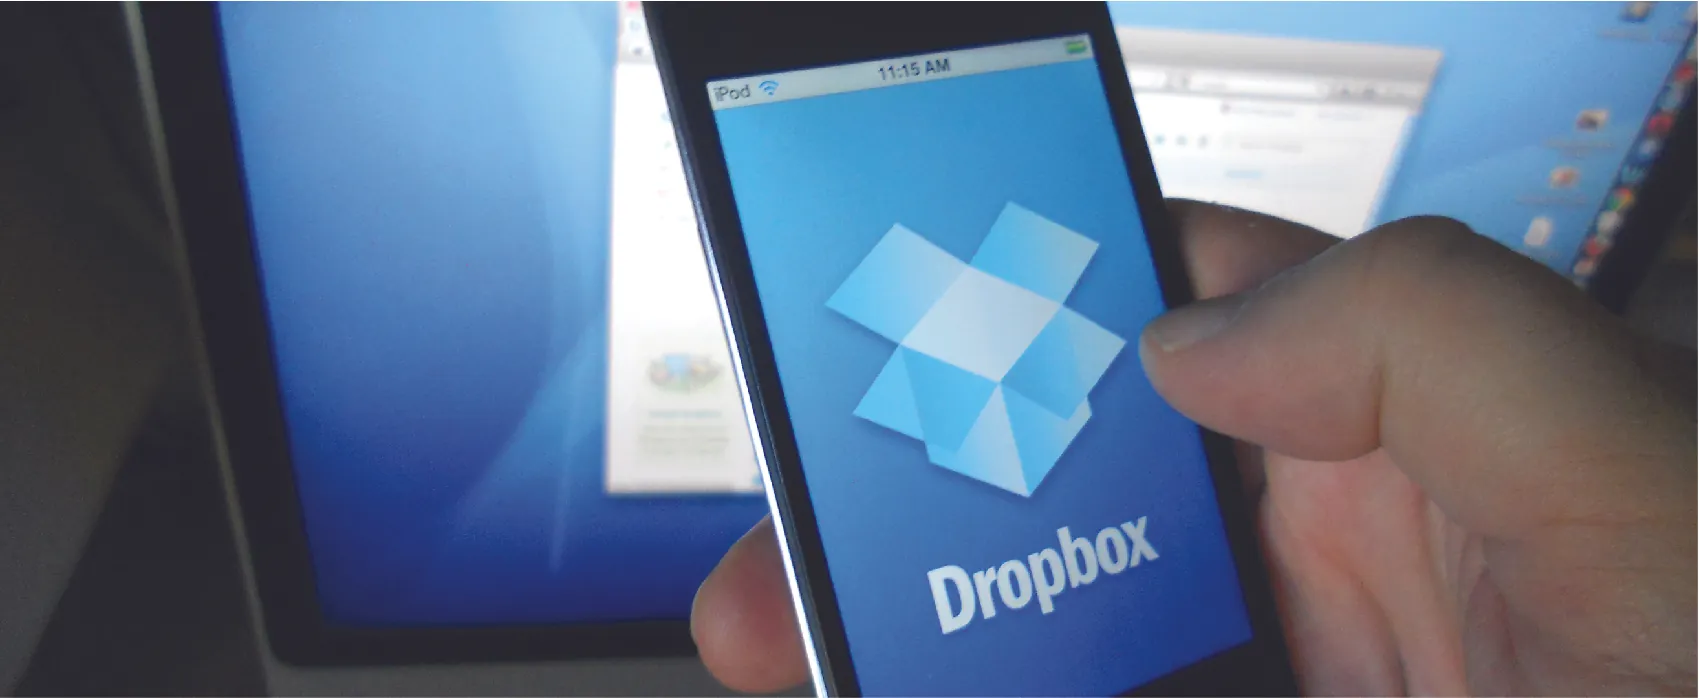 Photo of a cell phone with the Dropbox app open on the screen.